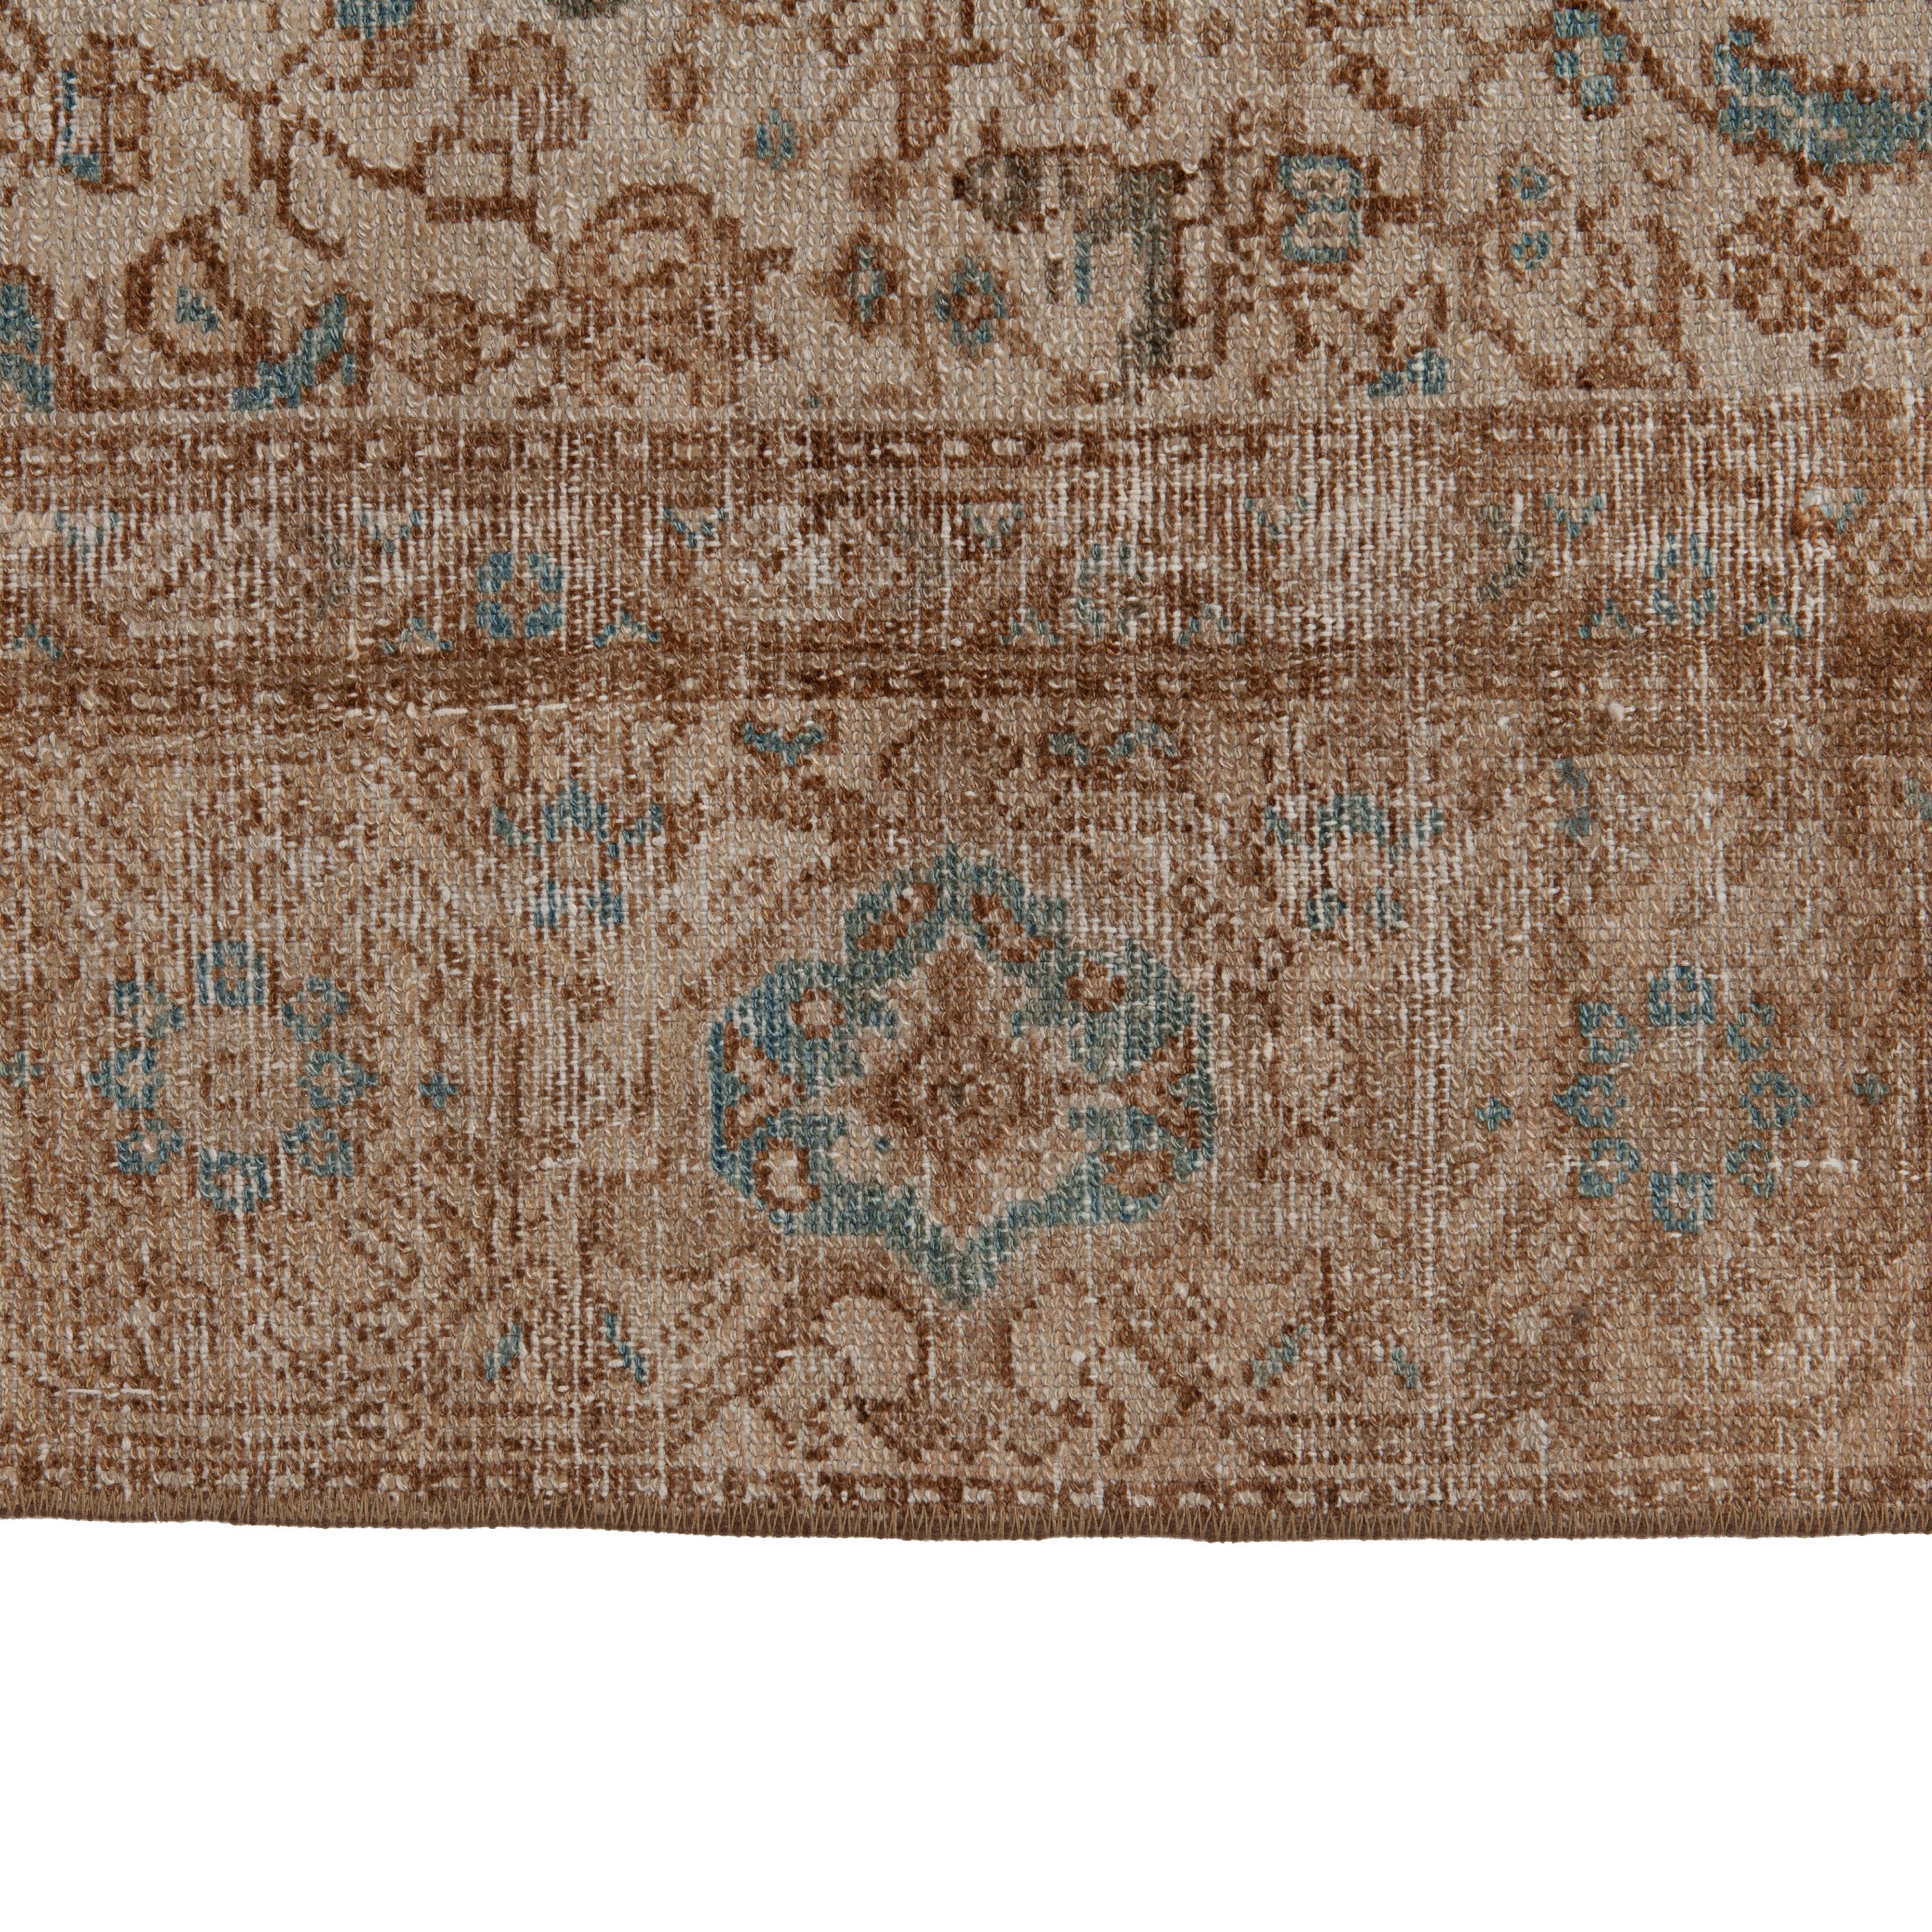 Featuring a variety of intricate traditional patterns in a neutral palette, this Anatolian Wool Rug - 4'9' x 10'1